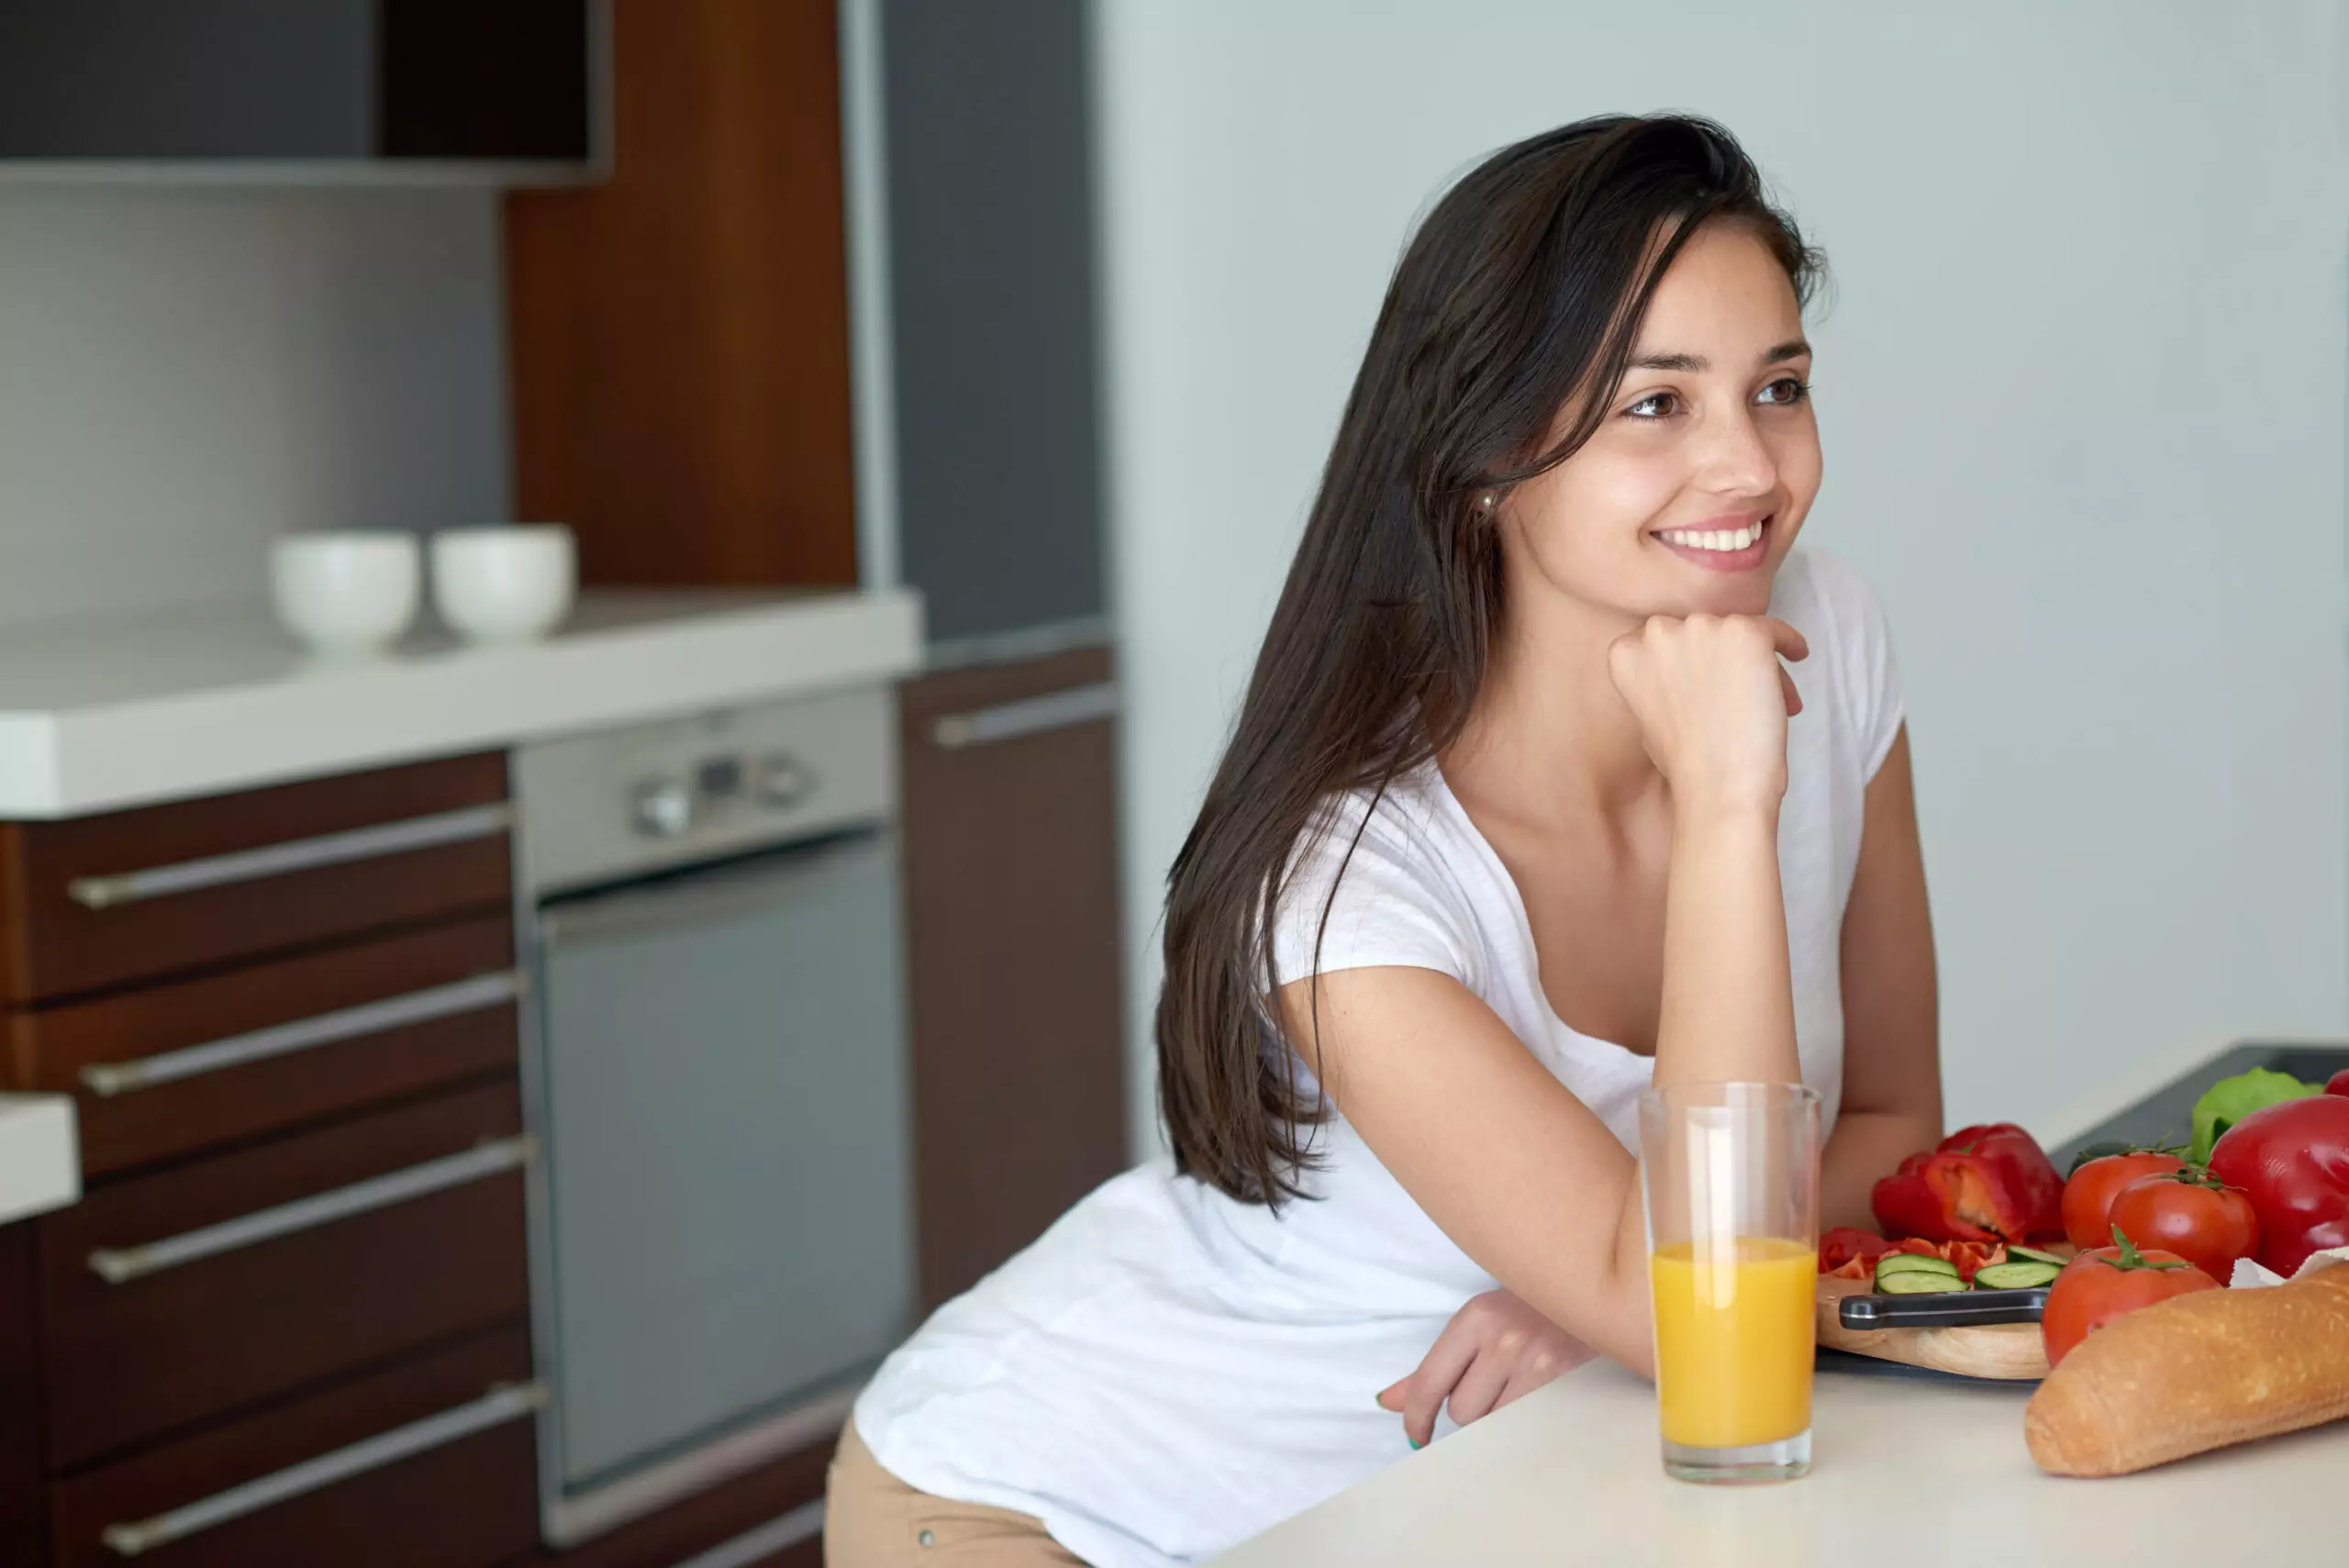 Woman smiling in kitchen with fresh vegetables and juice.